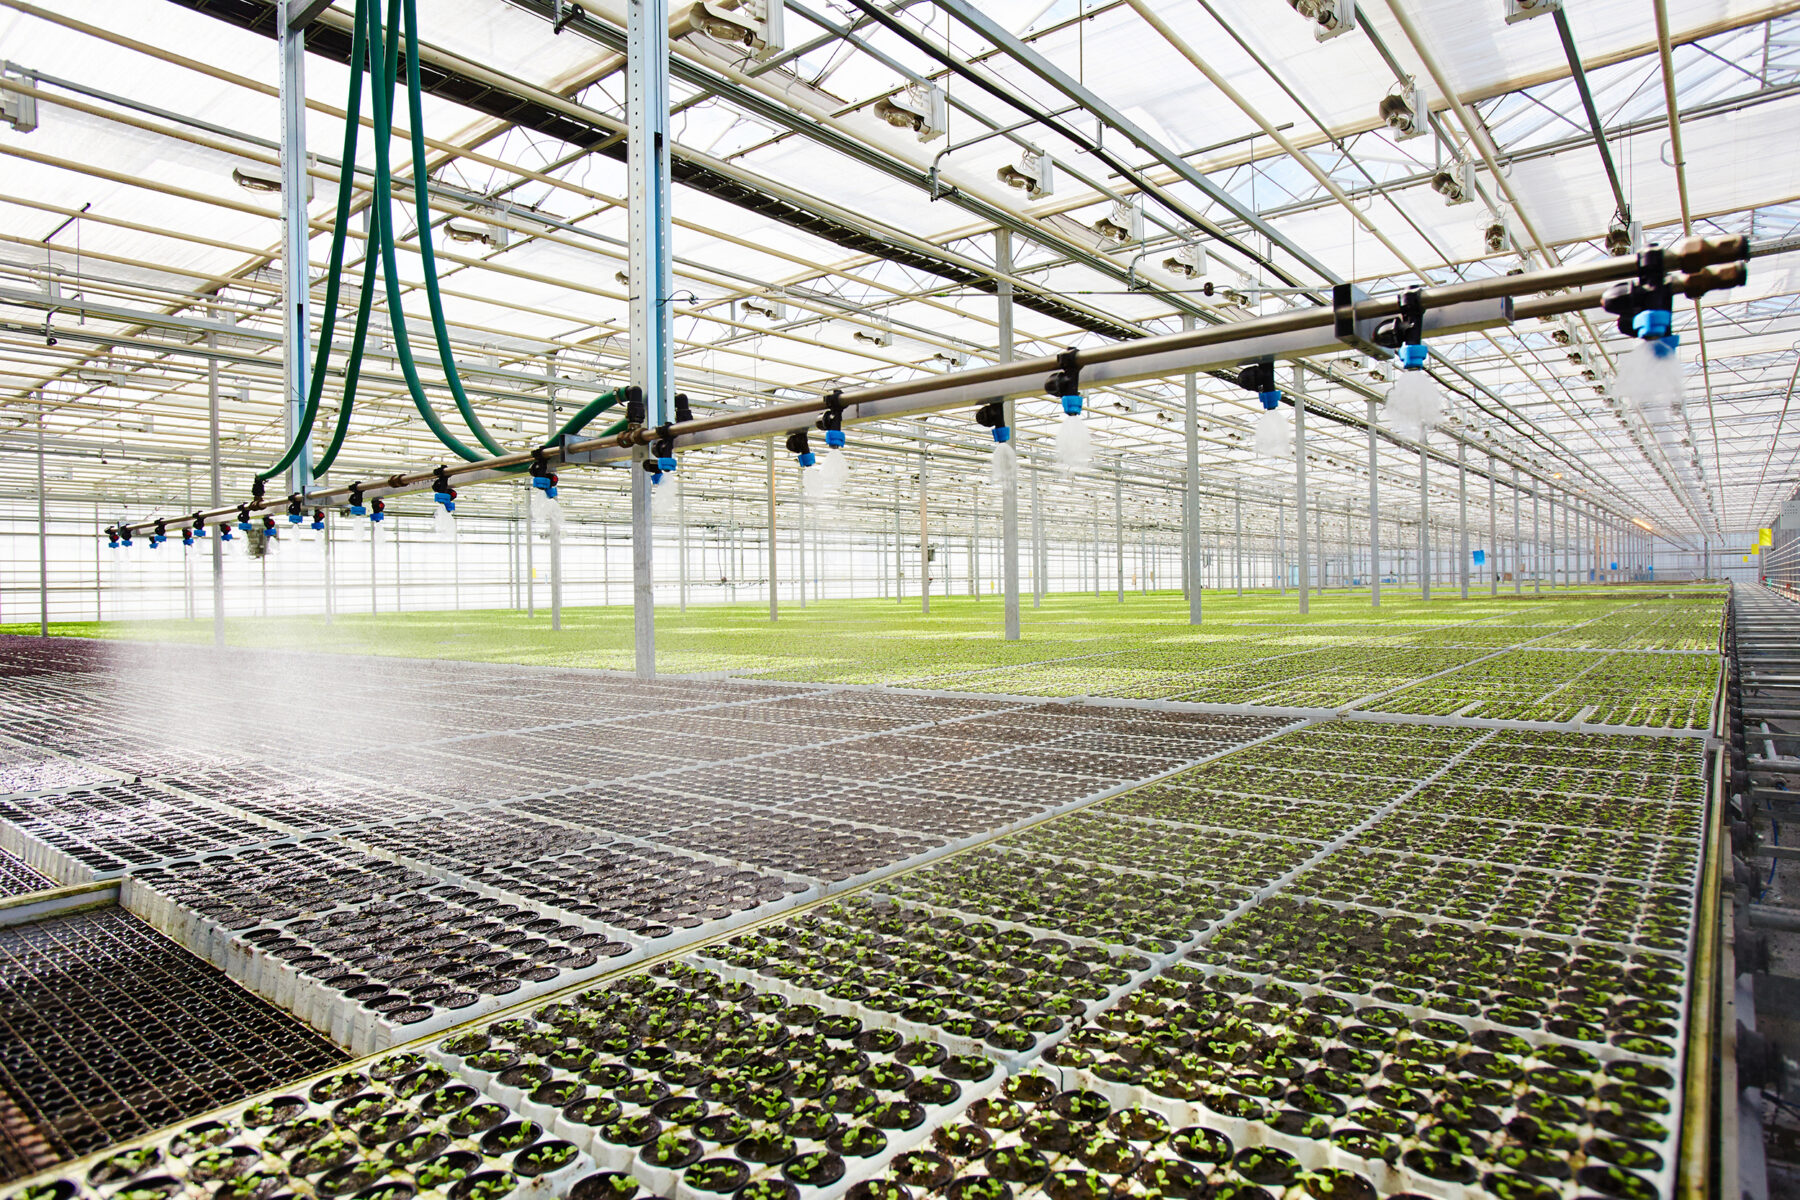 A water sprayer sprays seedling in a large commercial greenhouse.